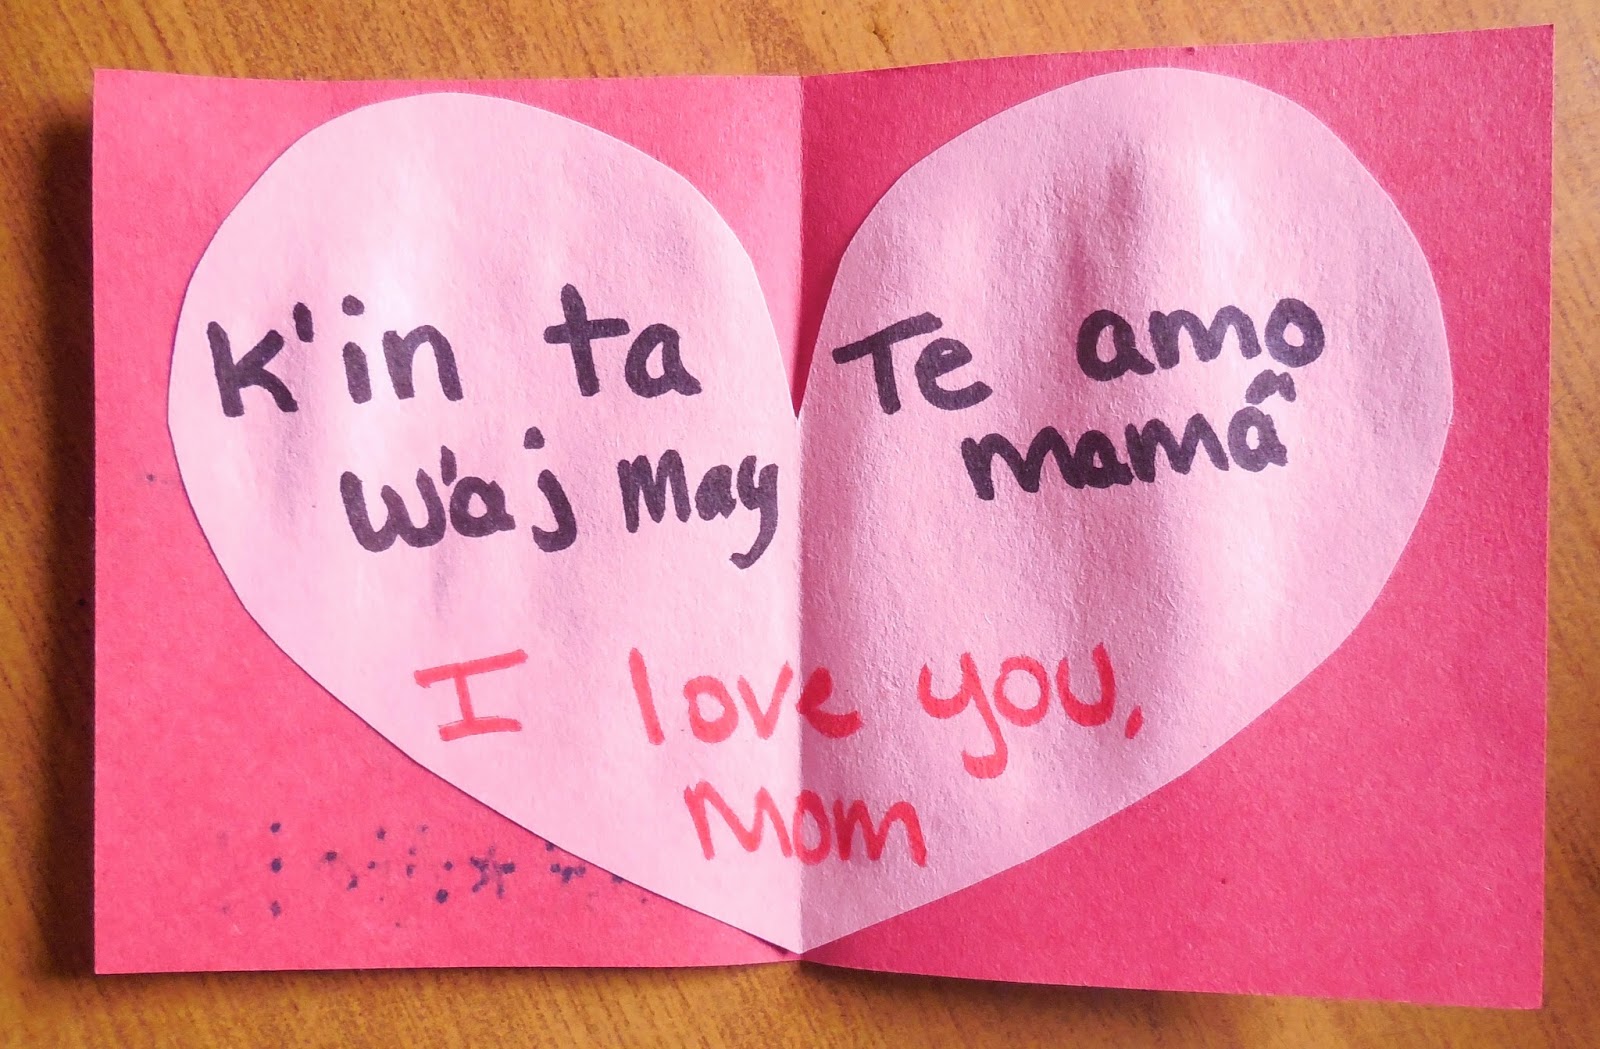 How To Say I Love You Mommy In Spanish